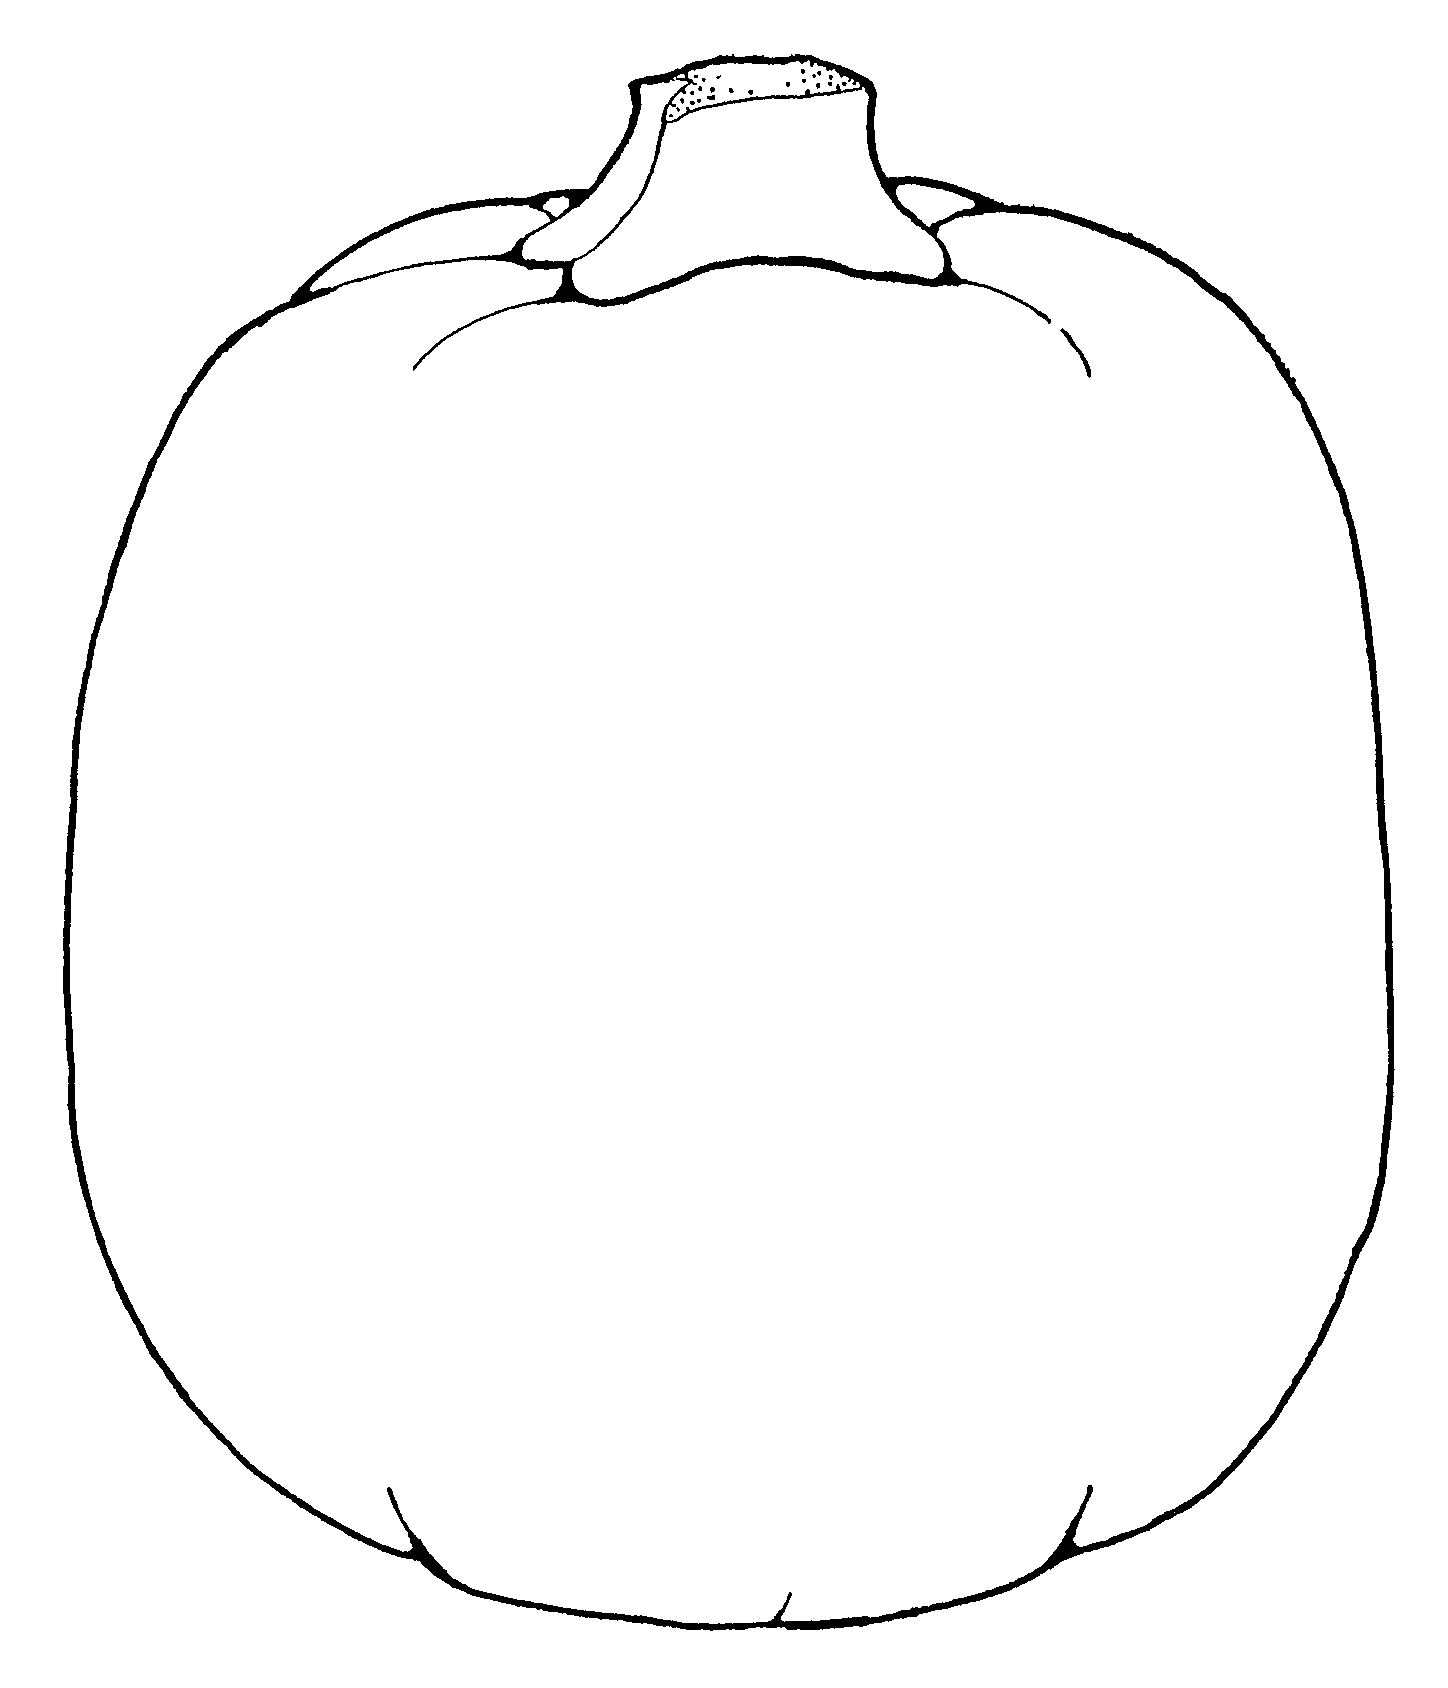 Clip Arts Related To : colouring picture of pumpkin. view all Pumpkin Outli...